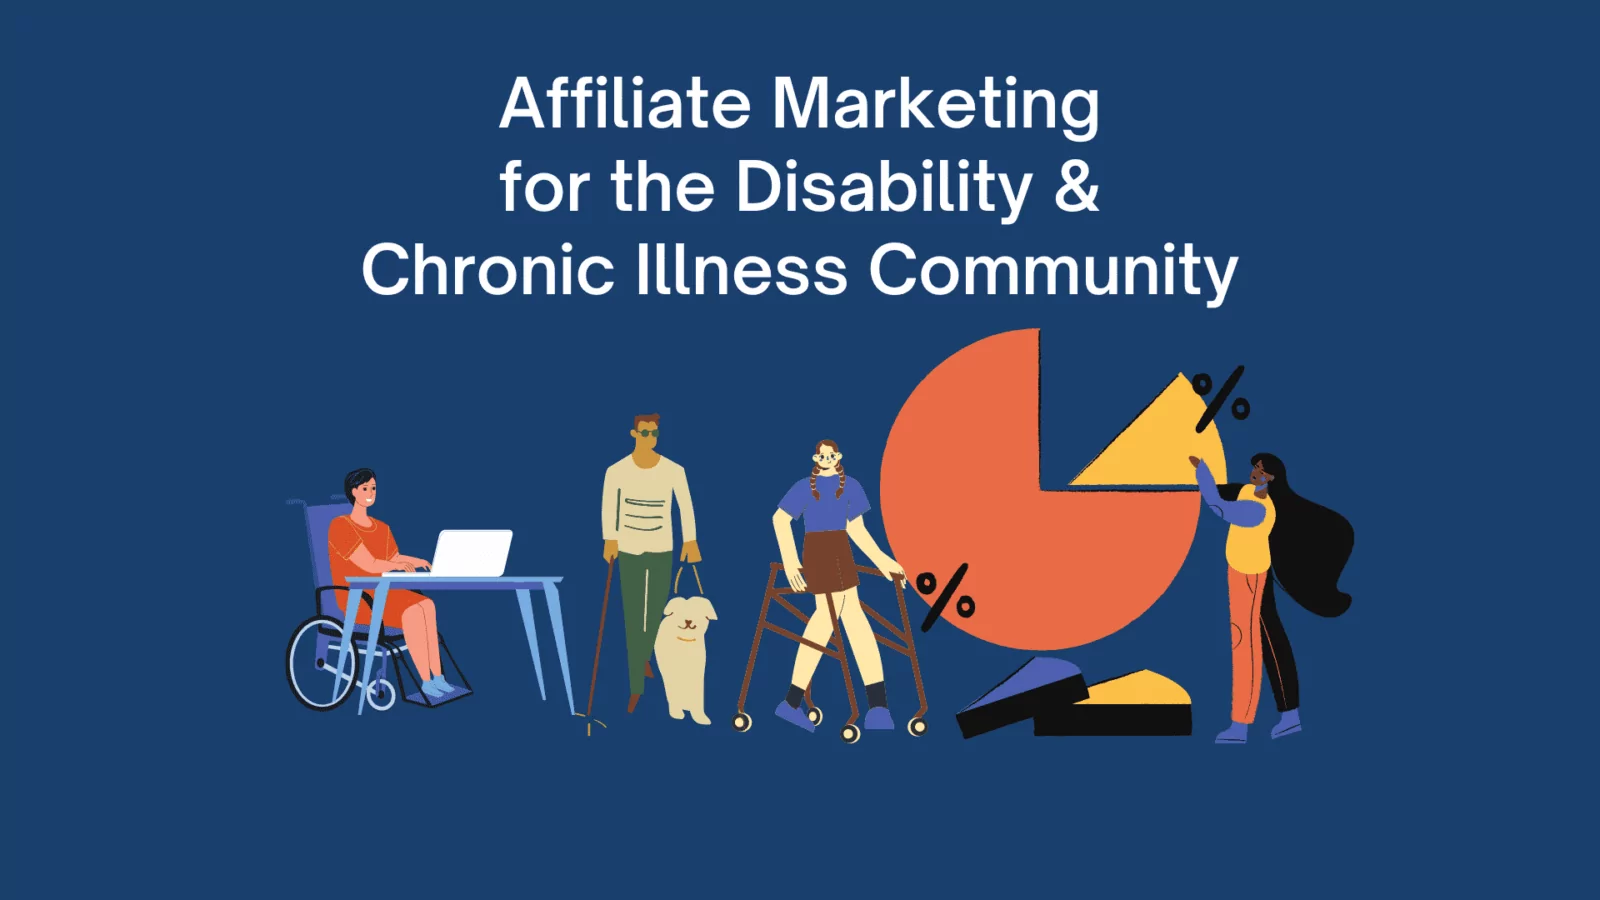 Affiliate marketing for the disability, chronic illness, and mental health community. Image of wheelchair user at desk, blind man with guide dog, woman using walker, and woman pointing at a pie chart.